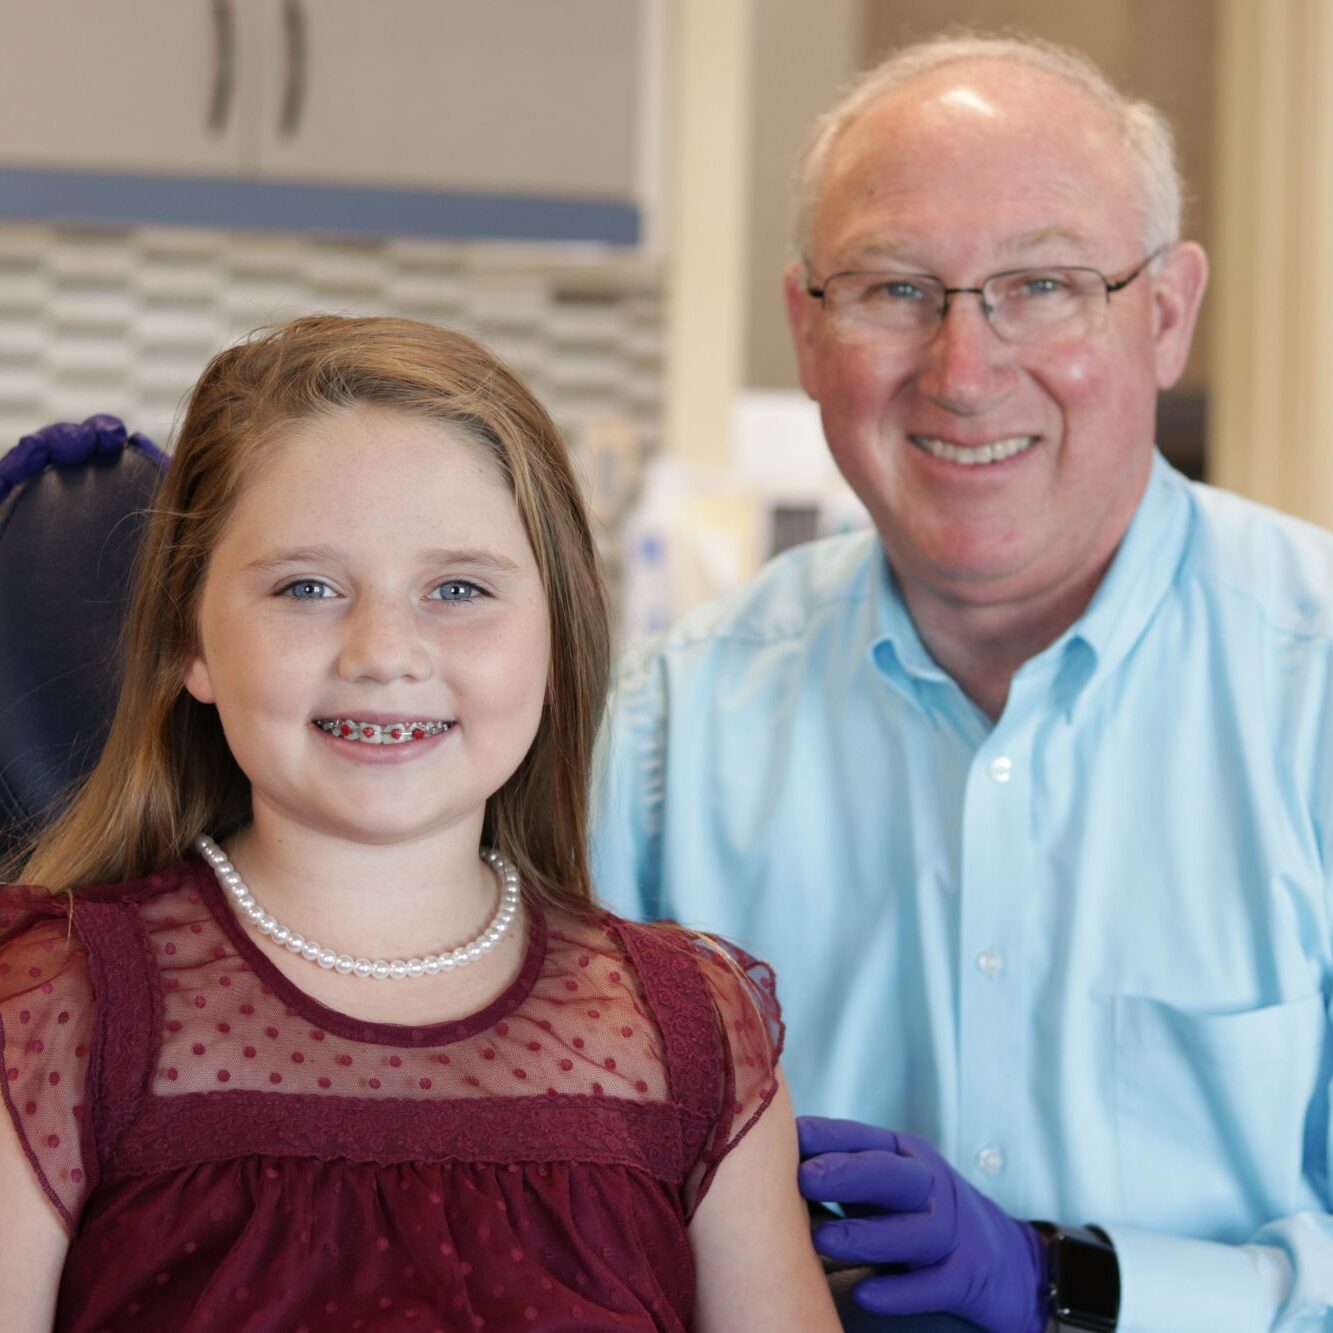 Dr. John Benton smiling with a young patient